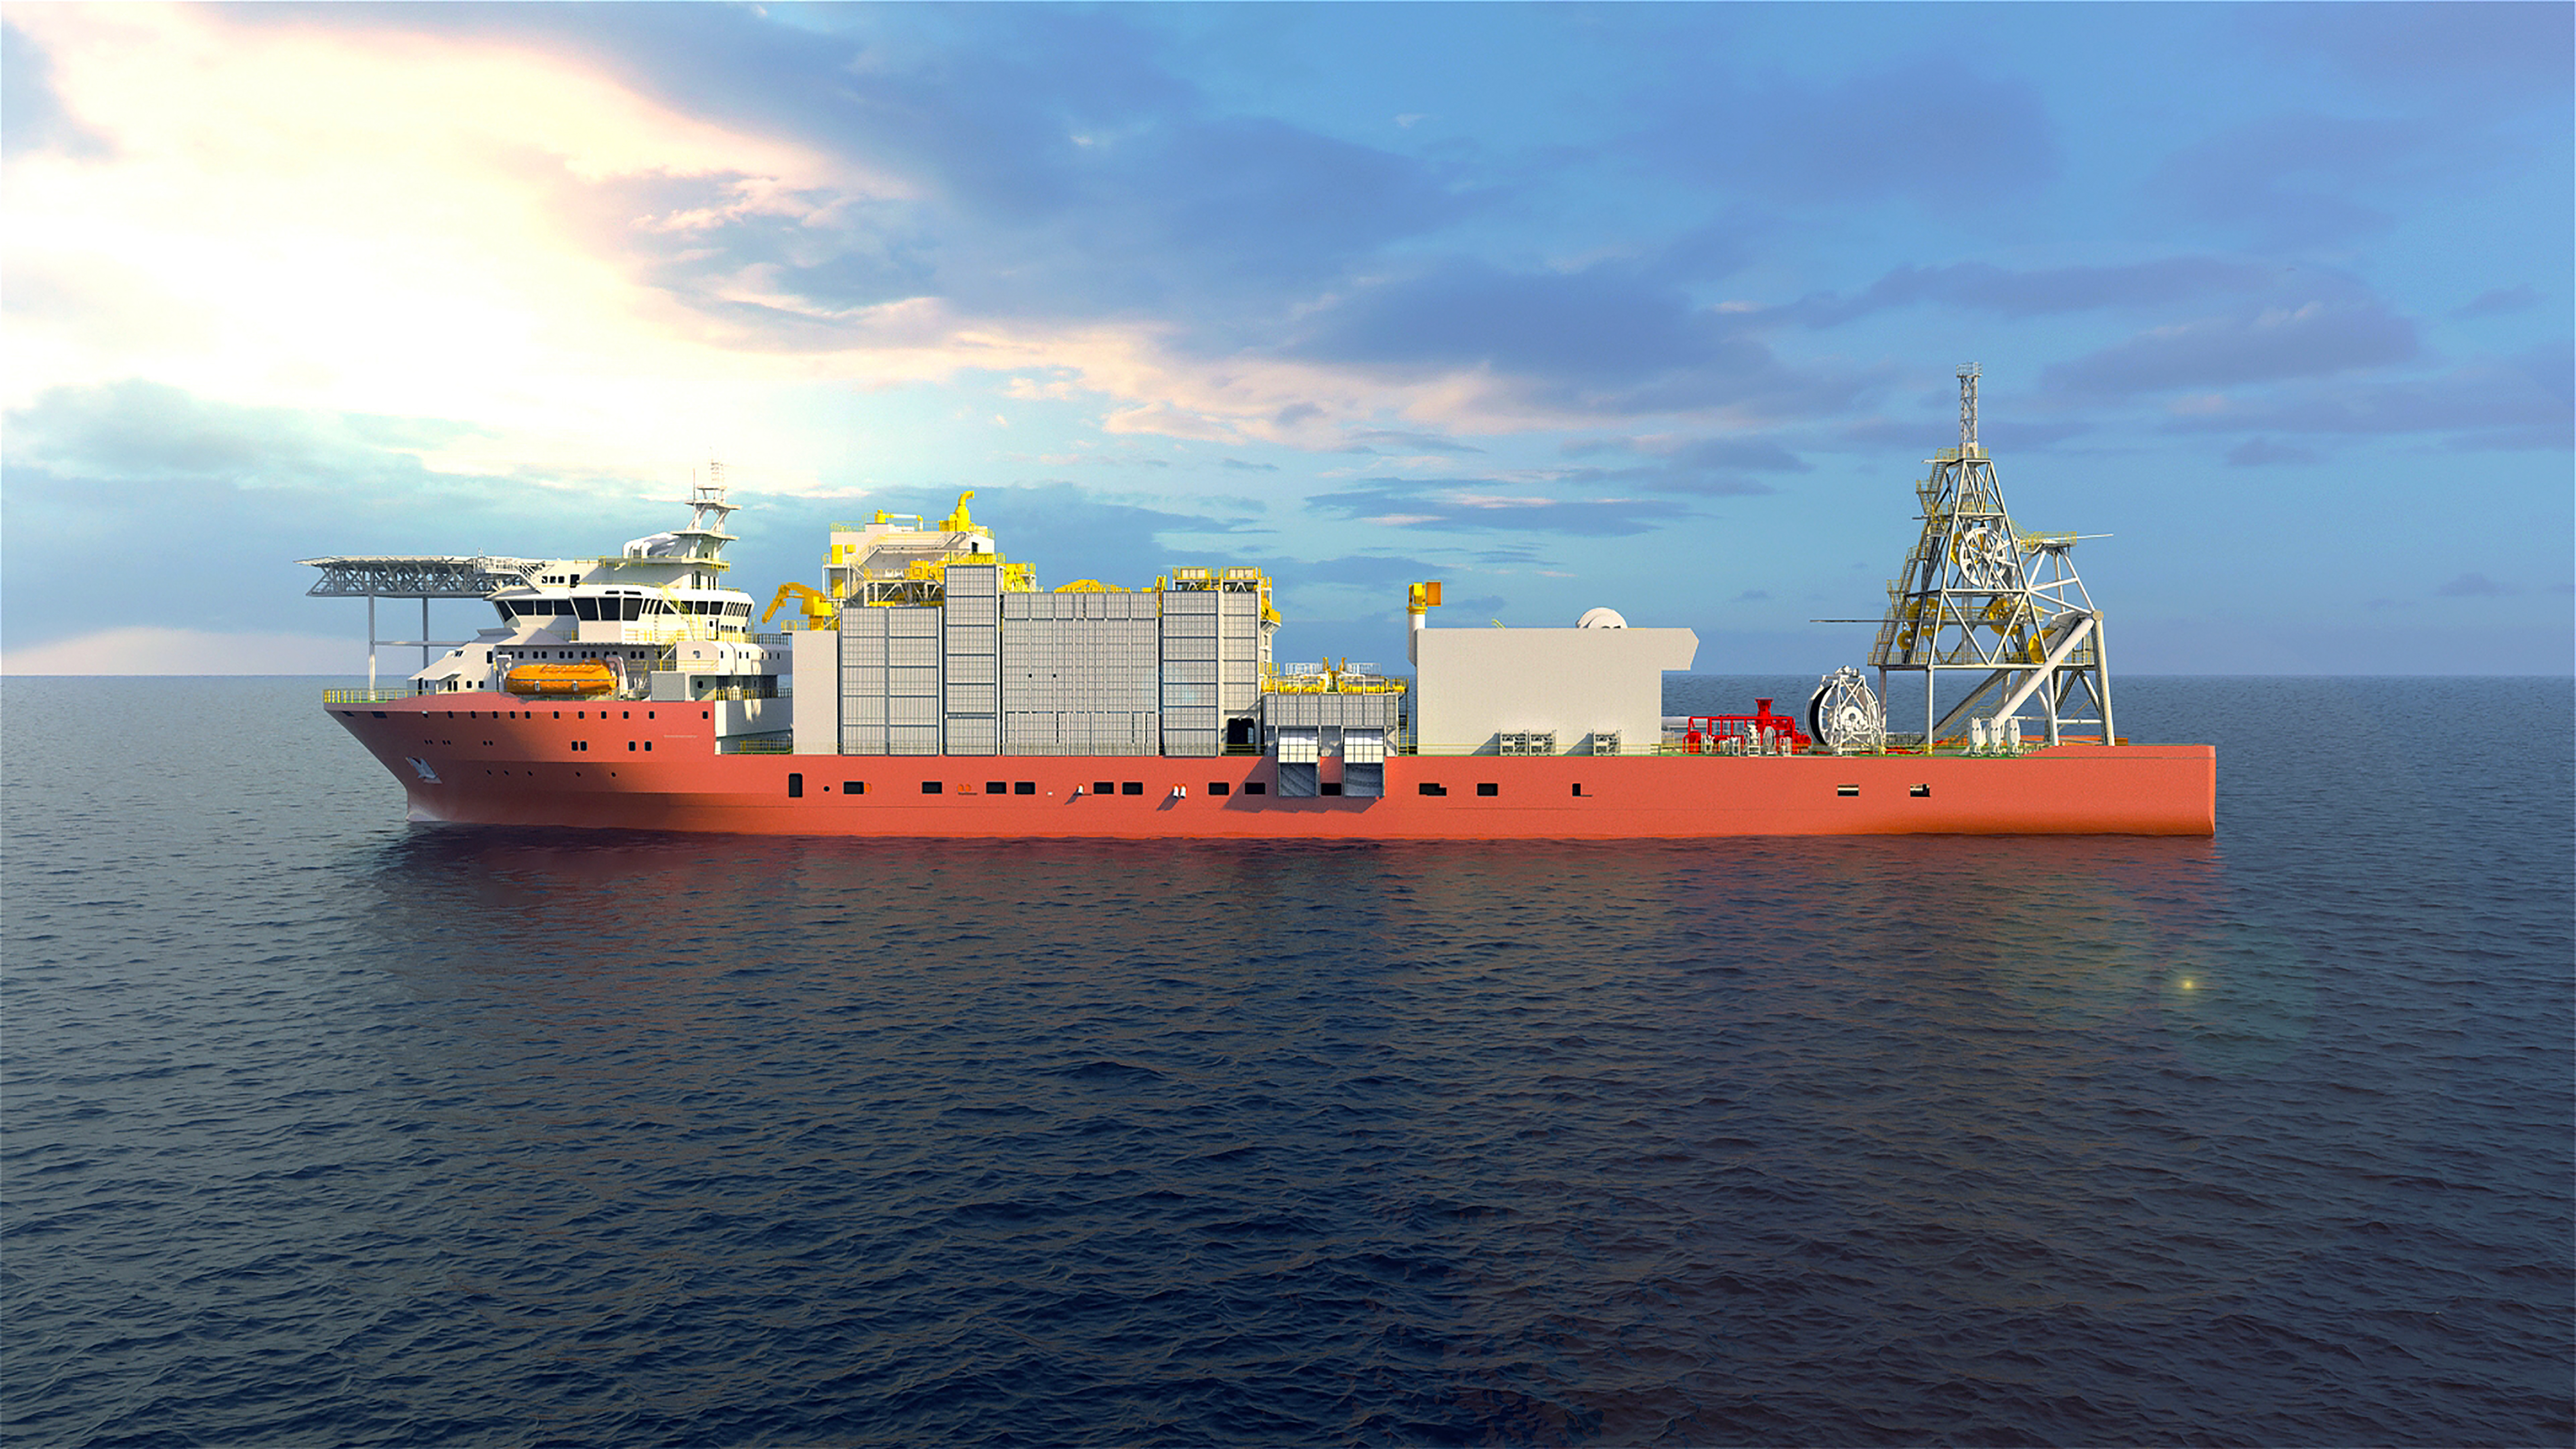 Alewijnse signs contract for electrical installation on board world’s newest and largest offshore diamond recovery vessel